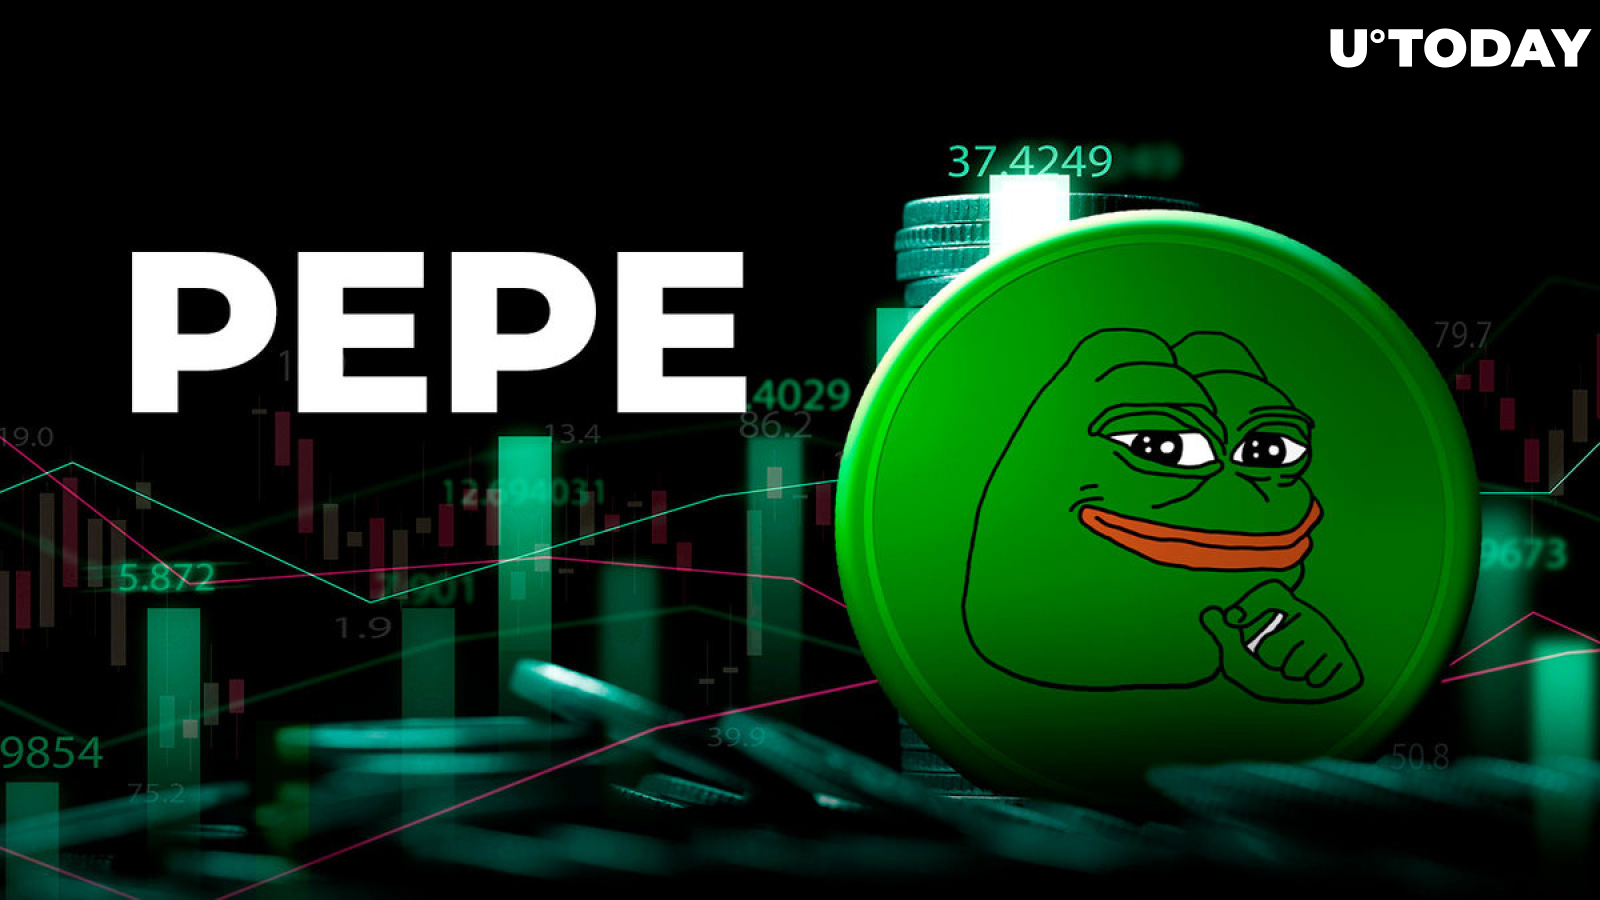 PEPE Rallies 22% to Hit New ATH: Details